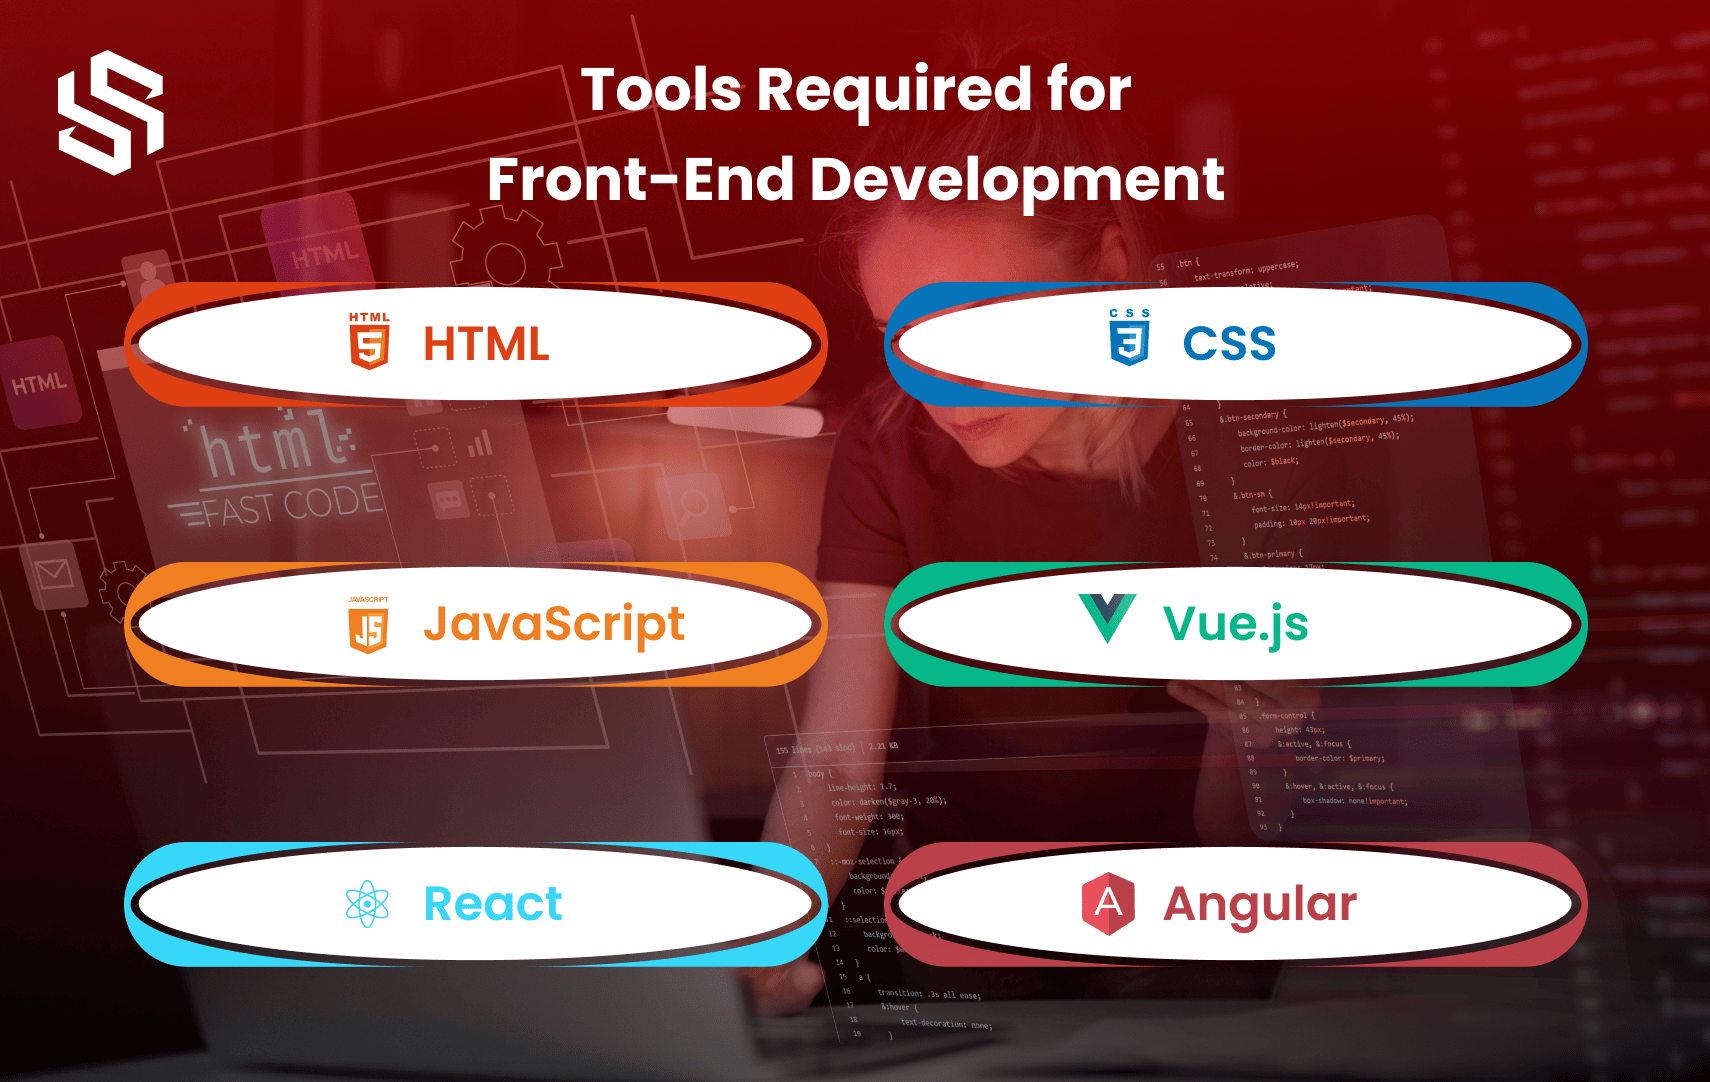 Tools Required for Front-End Development